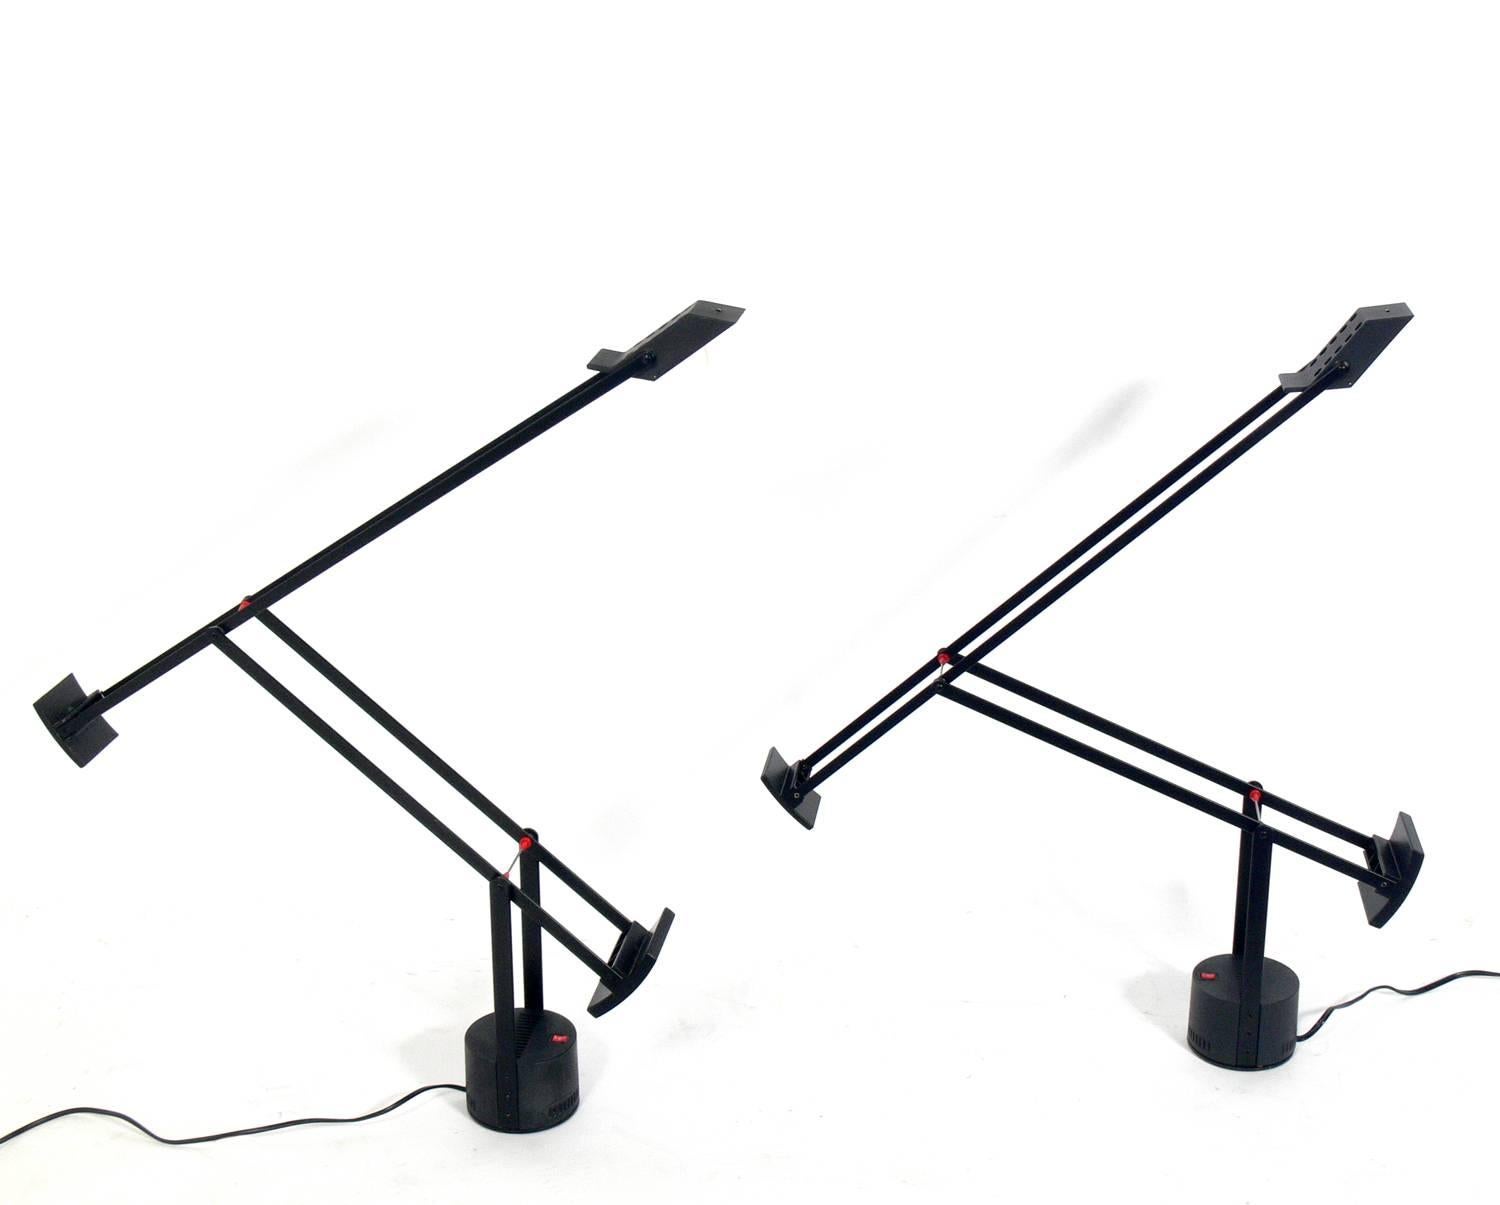 Mid-Century Modern Pair of Articulated Tizio Lamps by Richard Sapper for Artemide